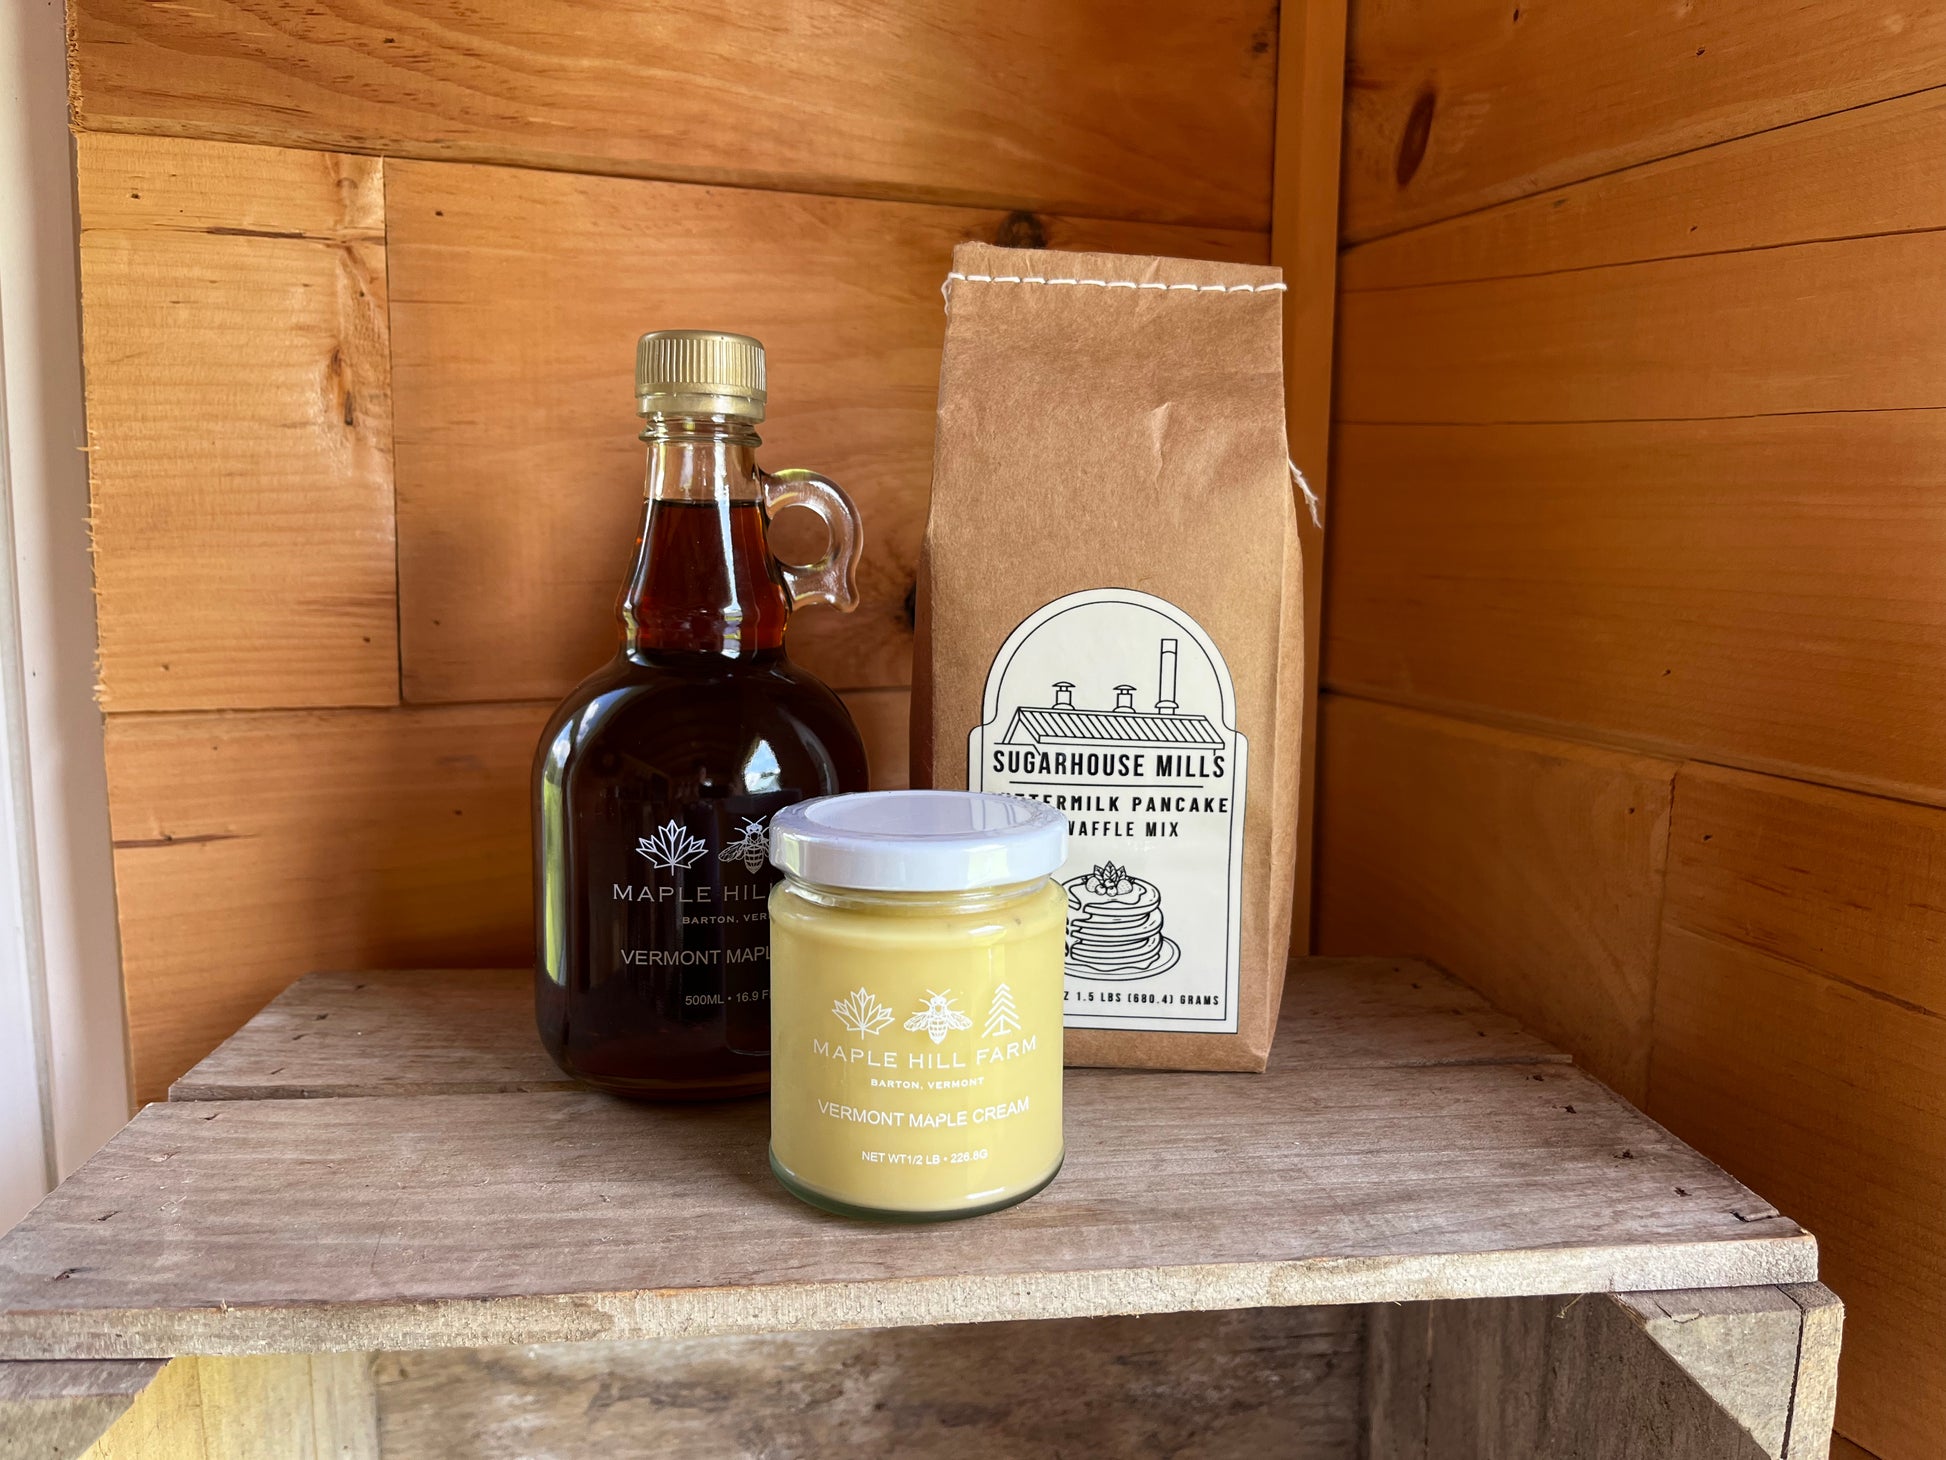 Pure Vermont Maple Syrup Maple Product Pack Breakfast Maple Hill Farm Barton Vermont